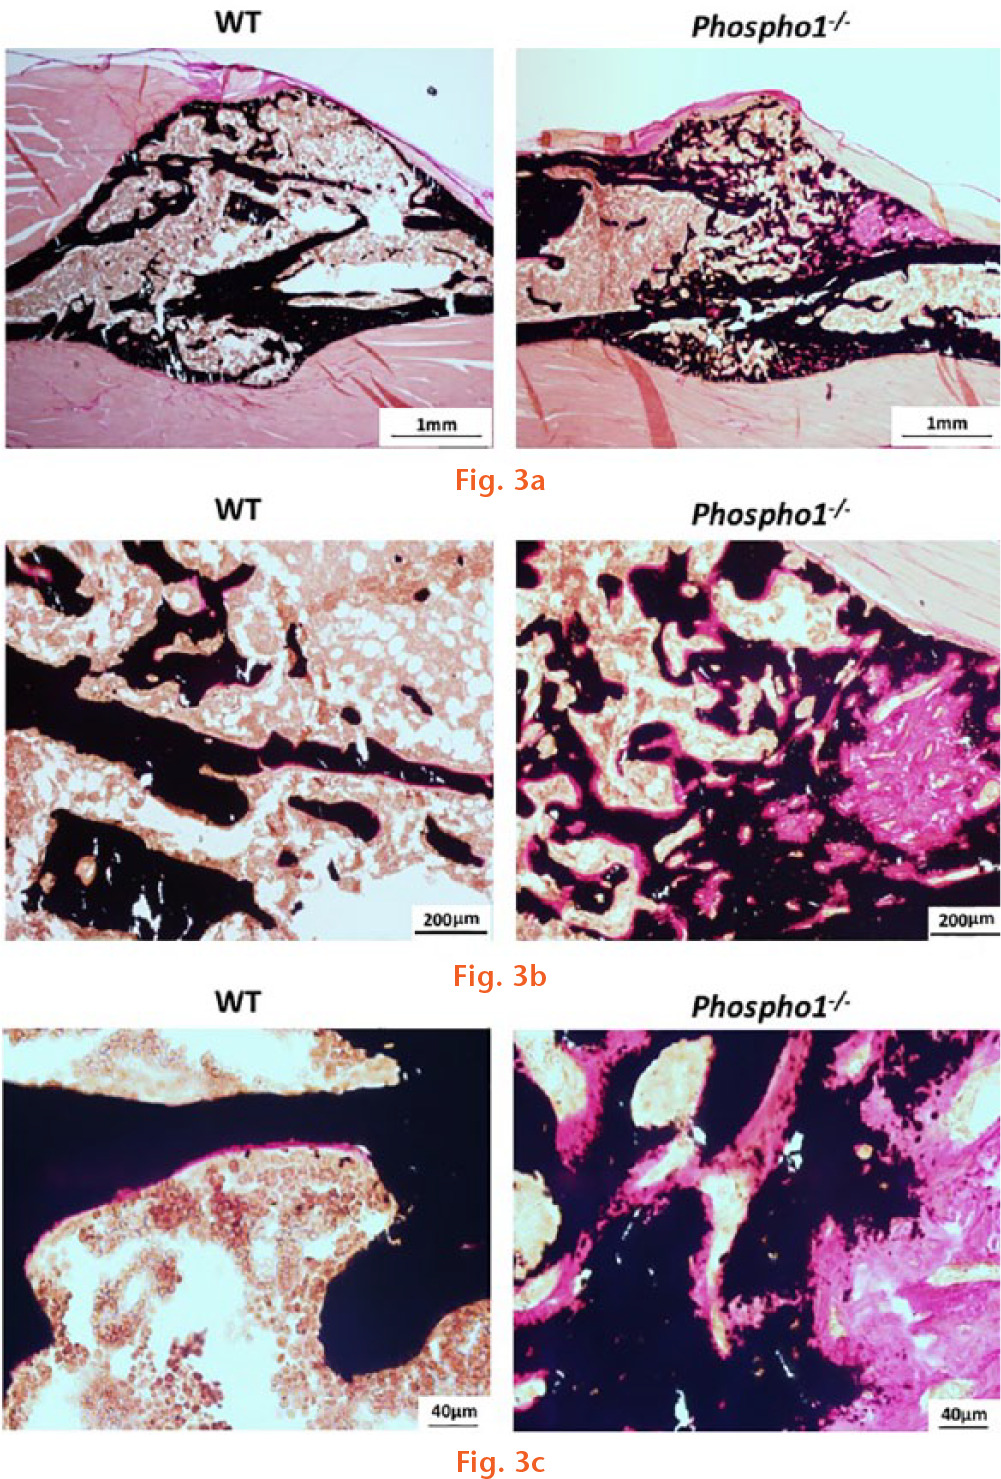 Fig. 3c 
            Microscopic images of tibia sections showing the fracture site. The sections were stained as per von Kossa and van Gieson, which stains unmineralized bone pink and mineralized bone black: a) wild-type (WT) sections showing normal fracture healing with a minimal amount of trabecular bone and evenly distributed osteoid. On the other hand, the Phospho1-/- fracture sections showed increased trabecular number and the osteoid formation. Panels (b) and (c) show the magnified view of the fractured bone sections.
          